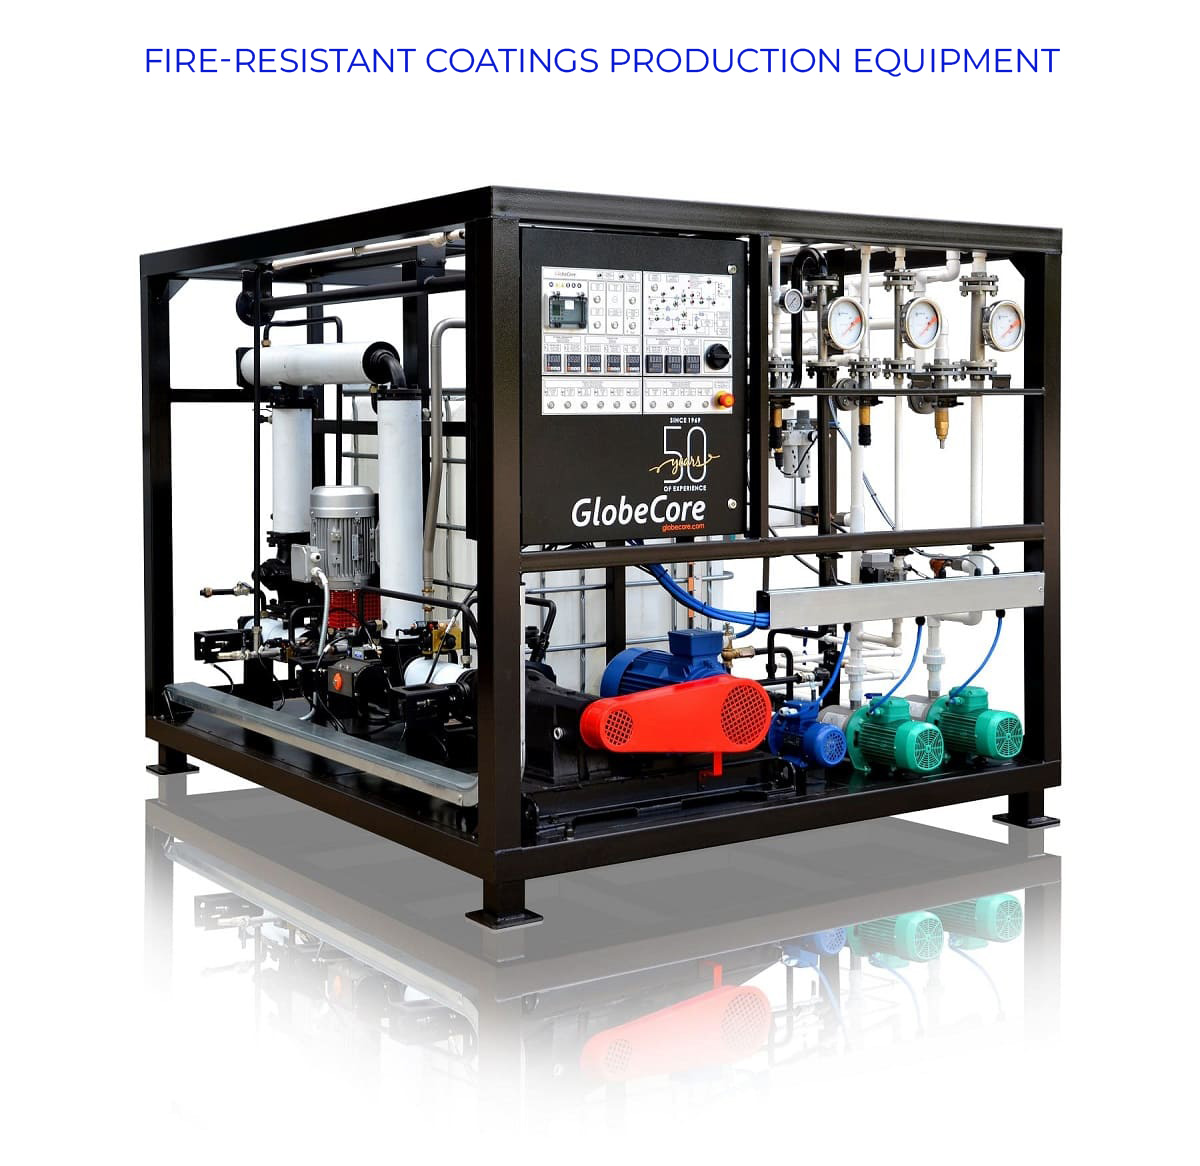 Fire-resistant coatings production equipment